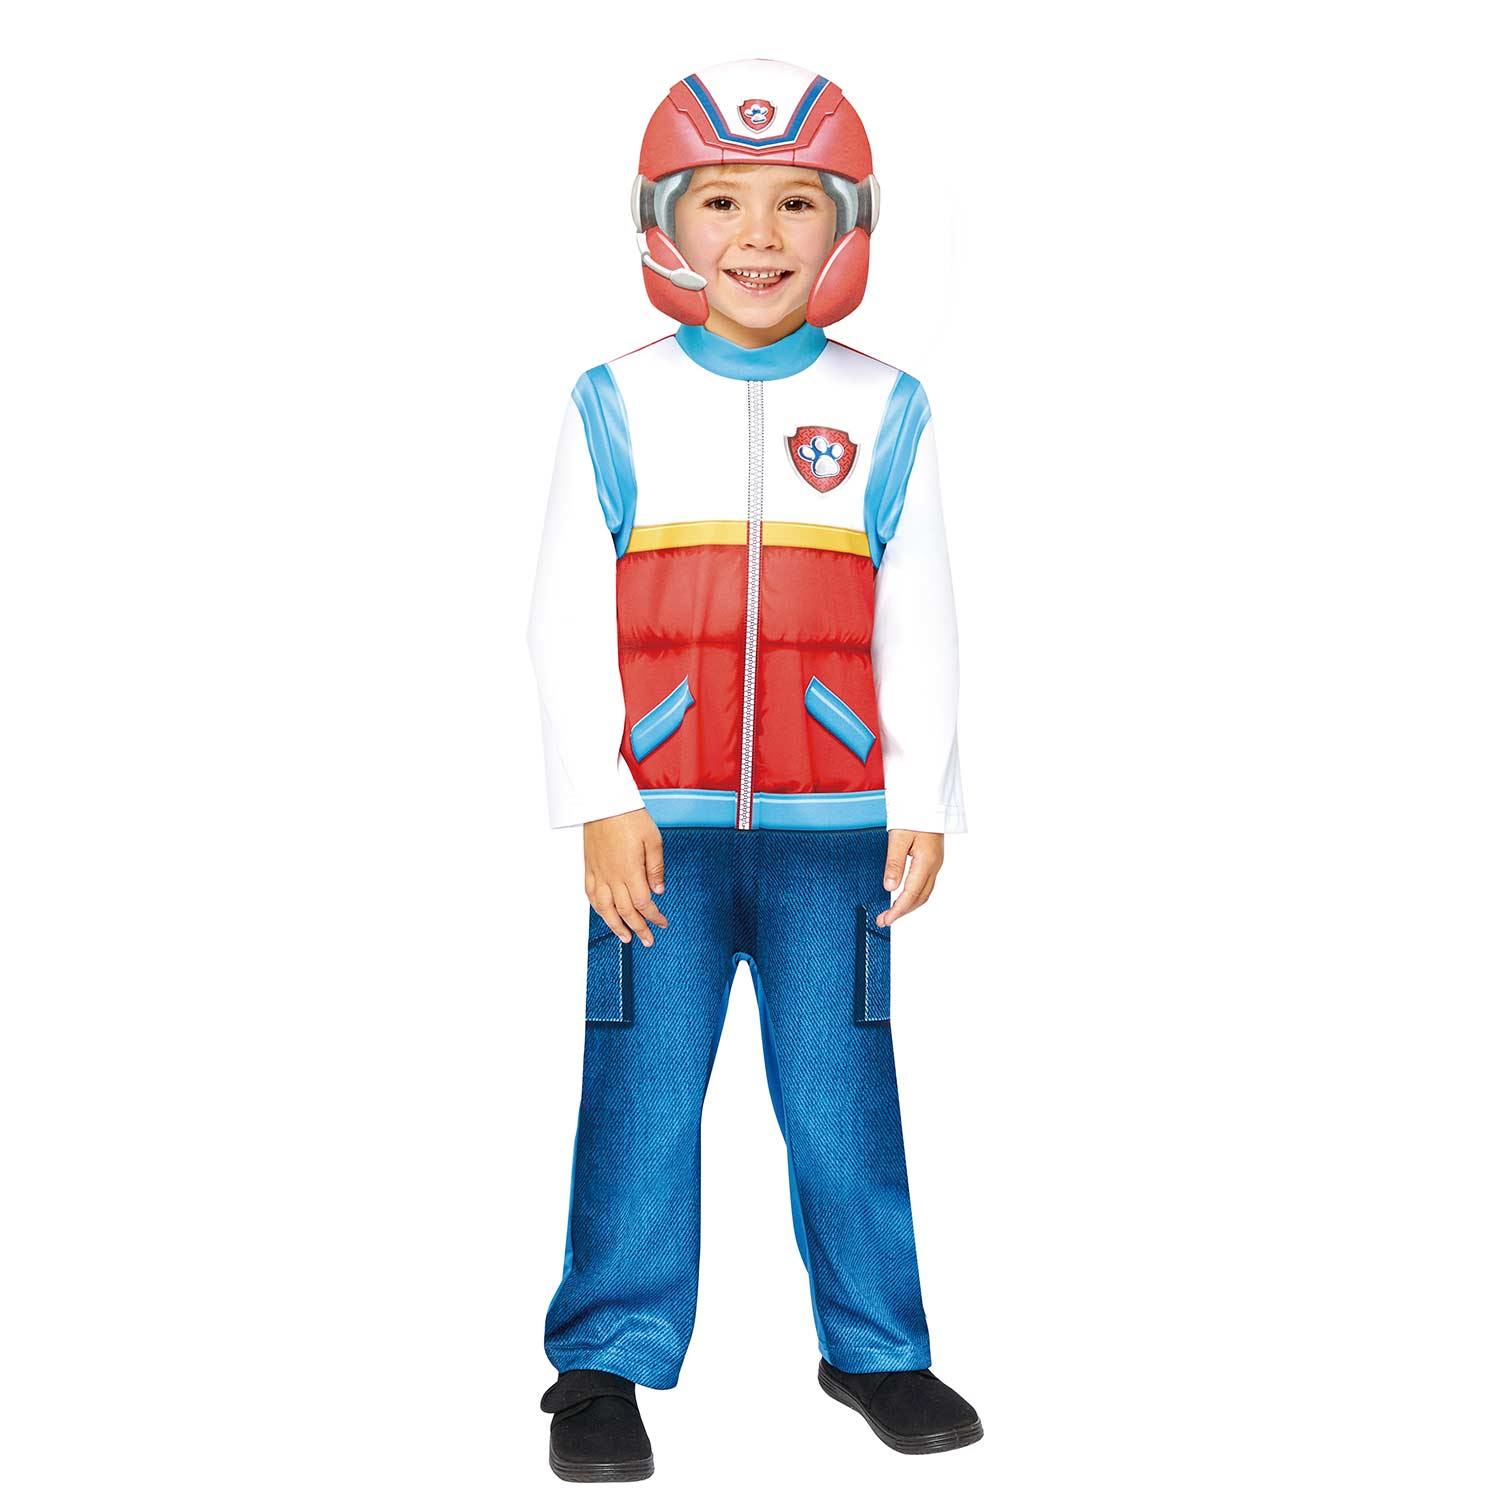 Ryder Costume Age 3-4 Years- 1 PC : Amscan International